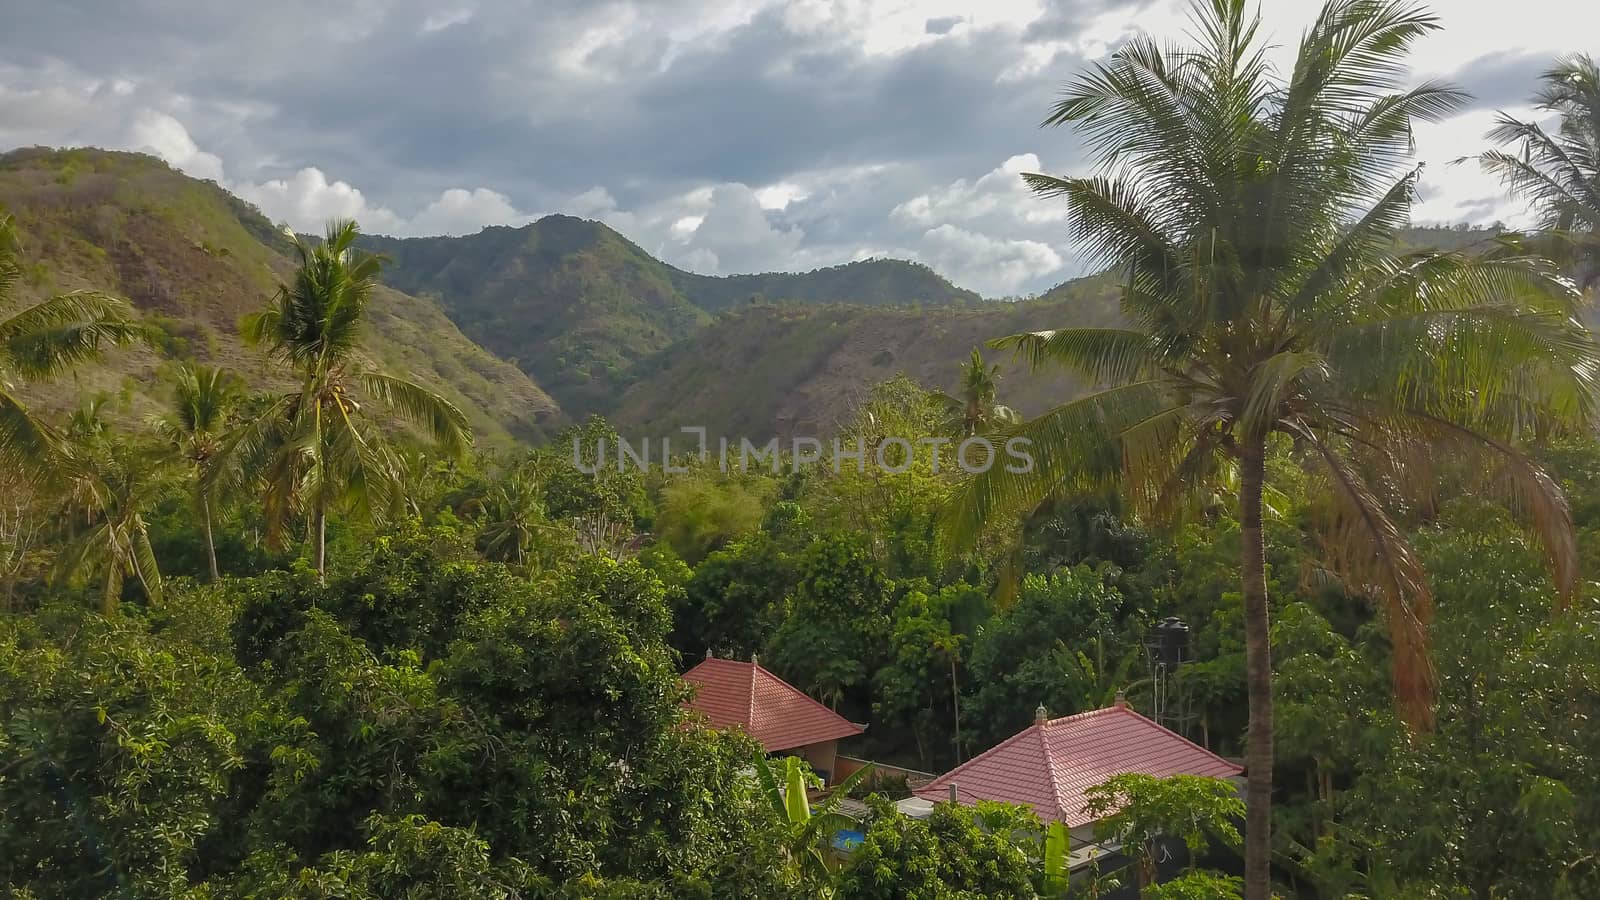 Living in wild. Small houses bungalow with red roof in Thai jungle, Koh Chang, Thailand. Panoramic asian countryside landscape with Thai wooden cottage in forest.